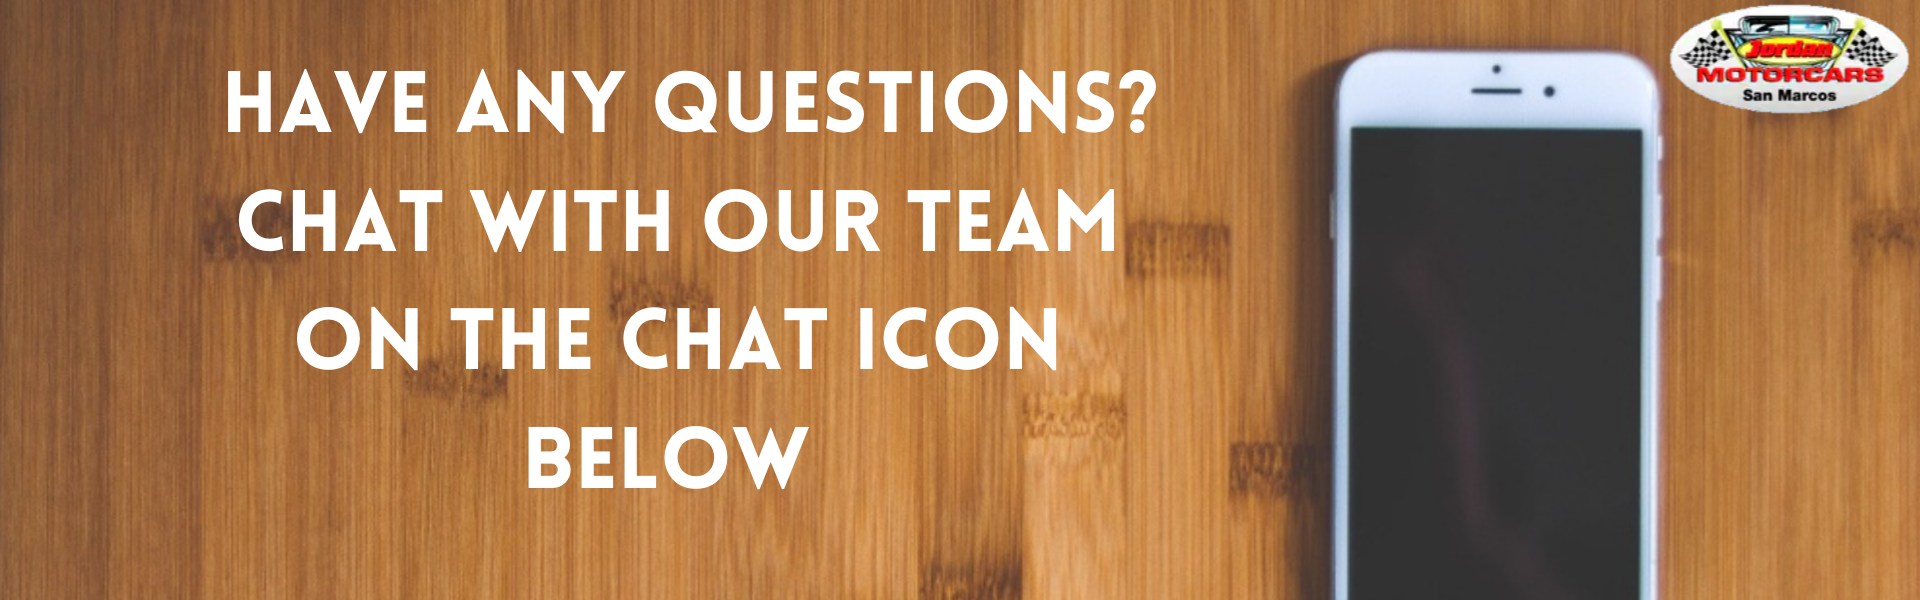 chat with our team